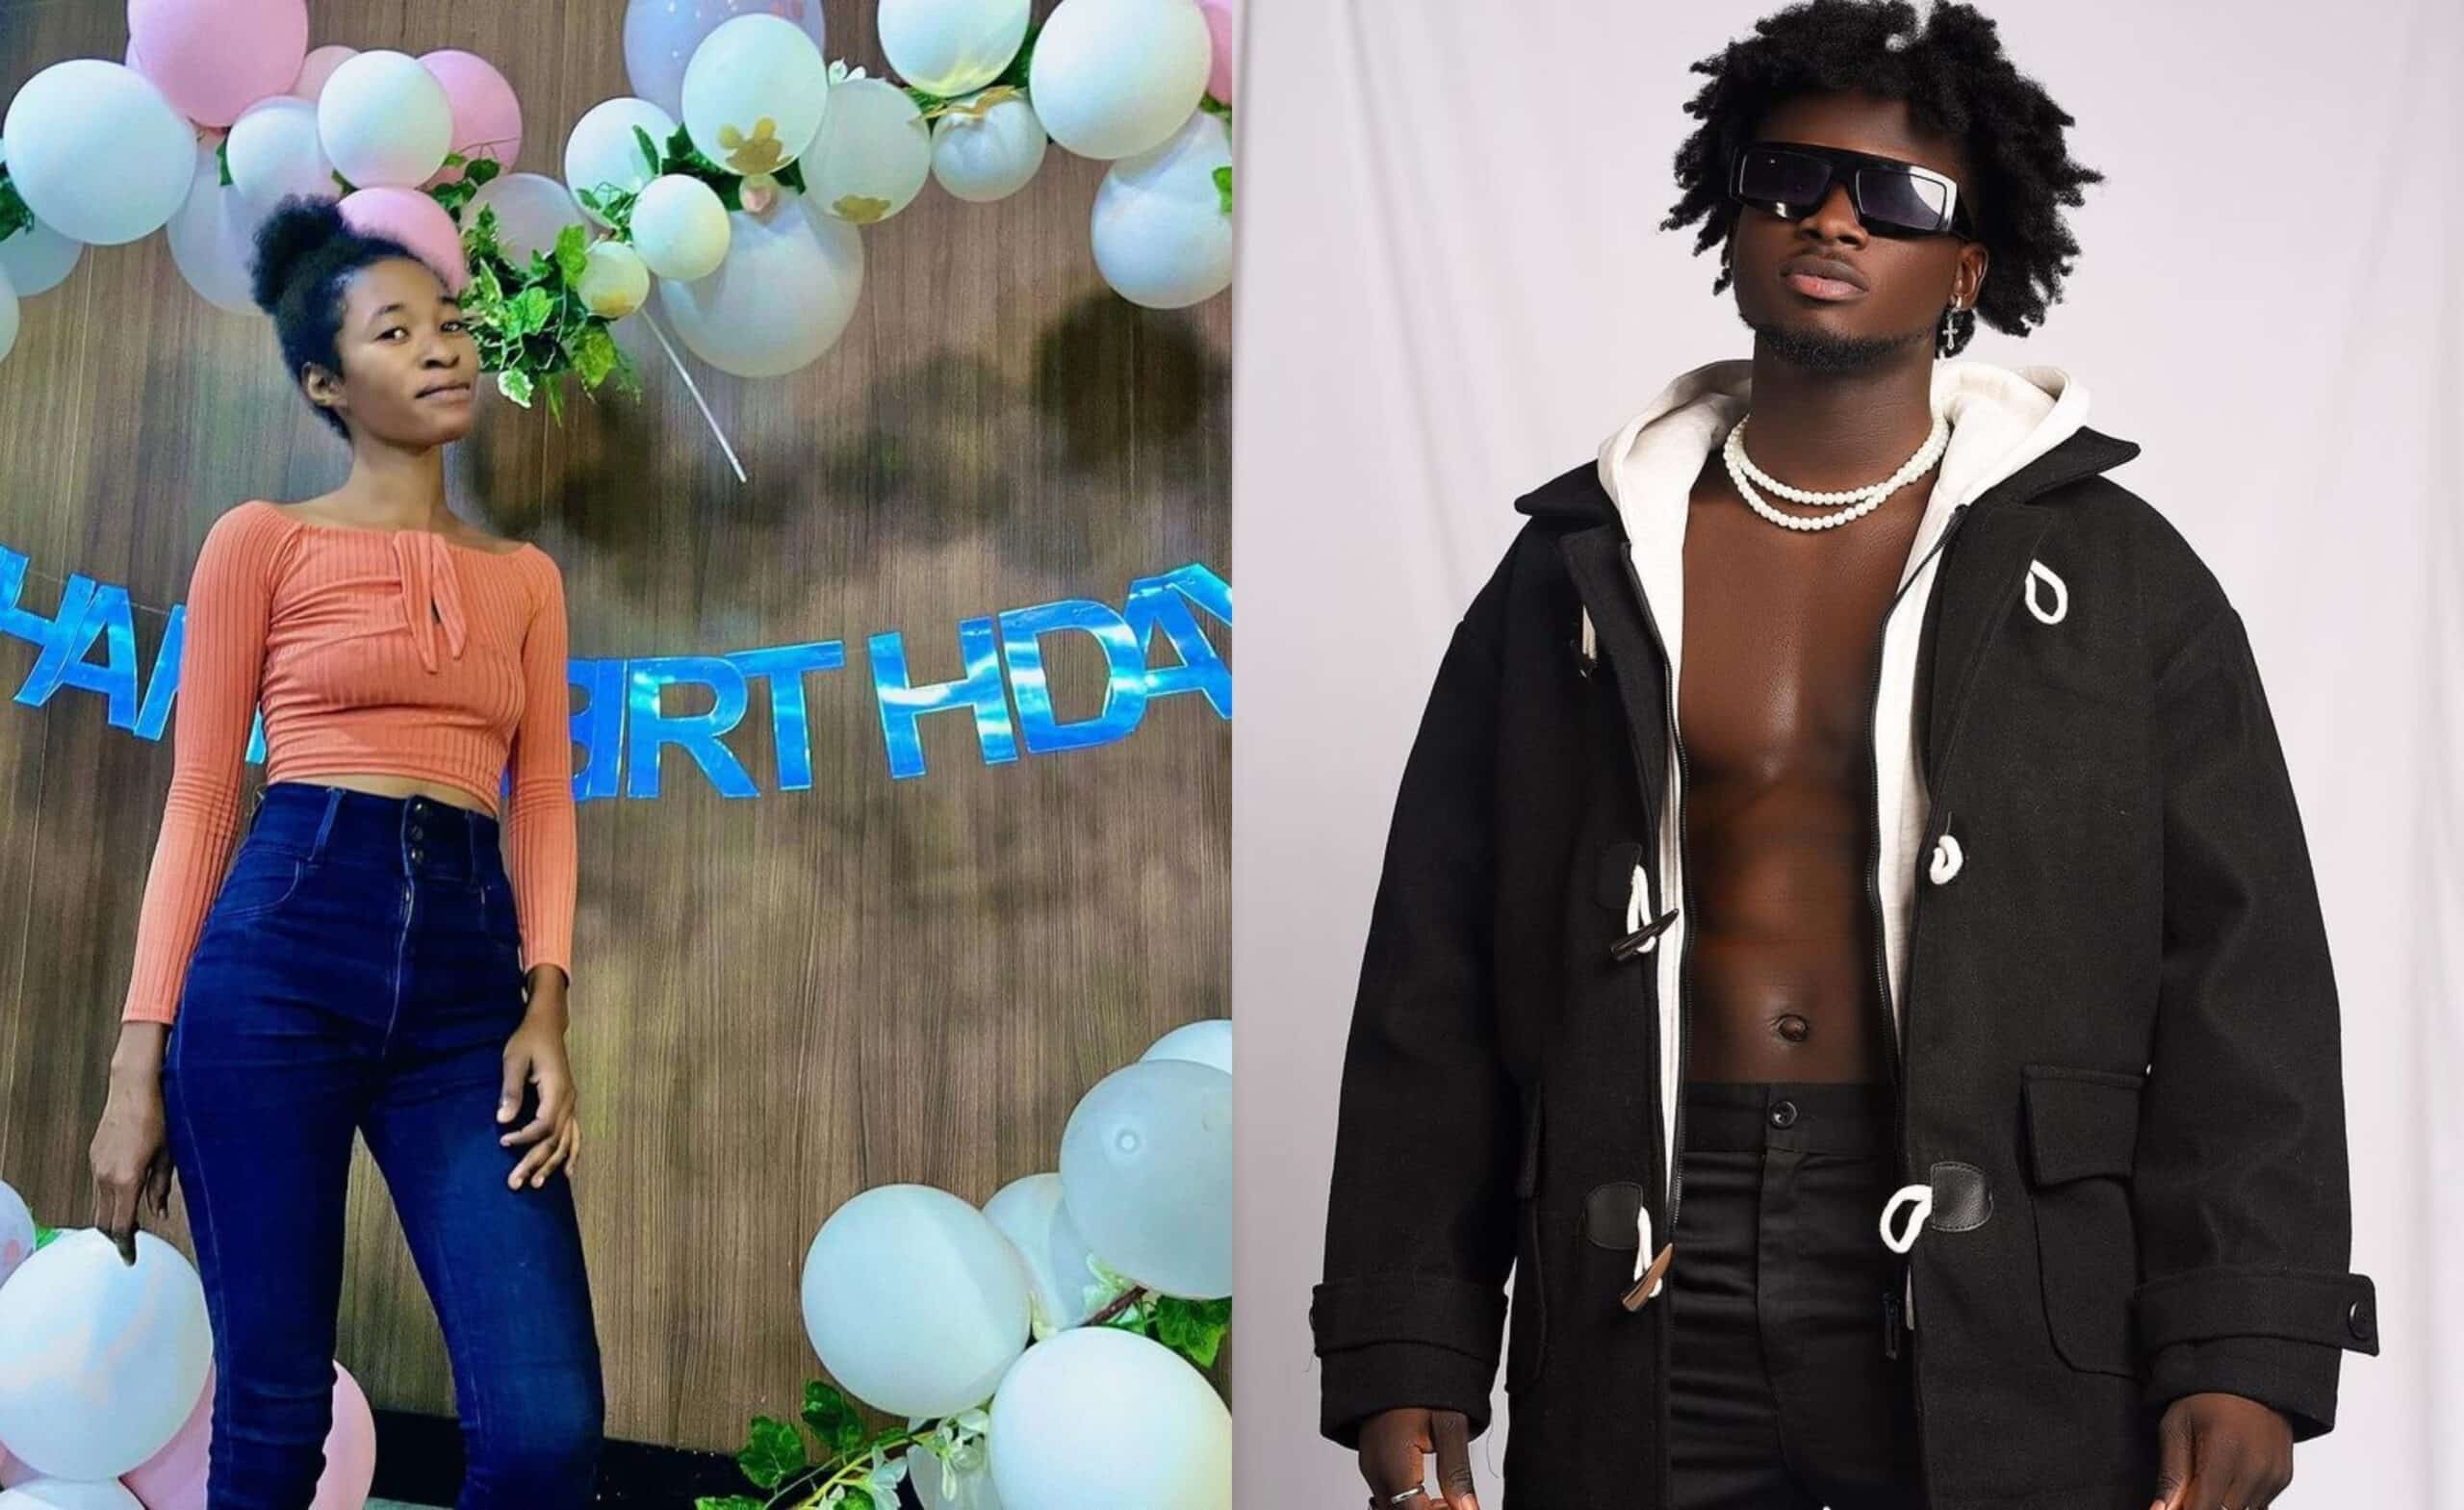 Kuami Eugene reacts after former househelp, Mary accused him of paying her peanuts after sacking her